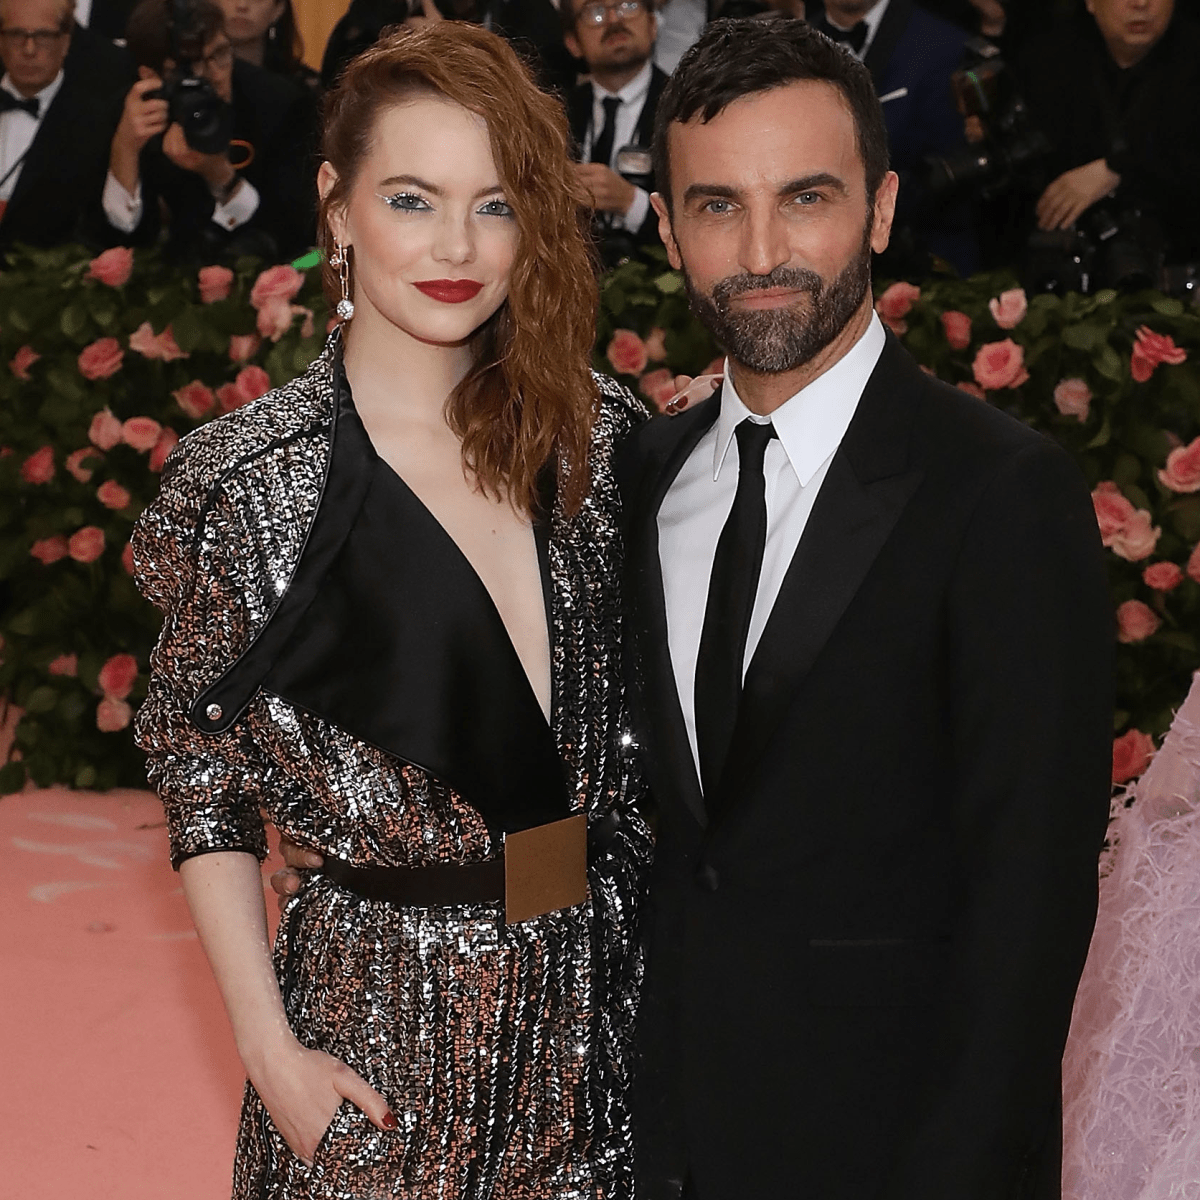 A closer look: Louis Vuitton at the Met Gala 